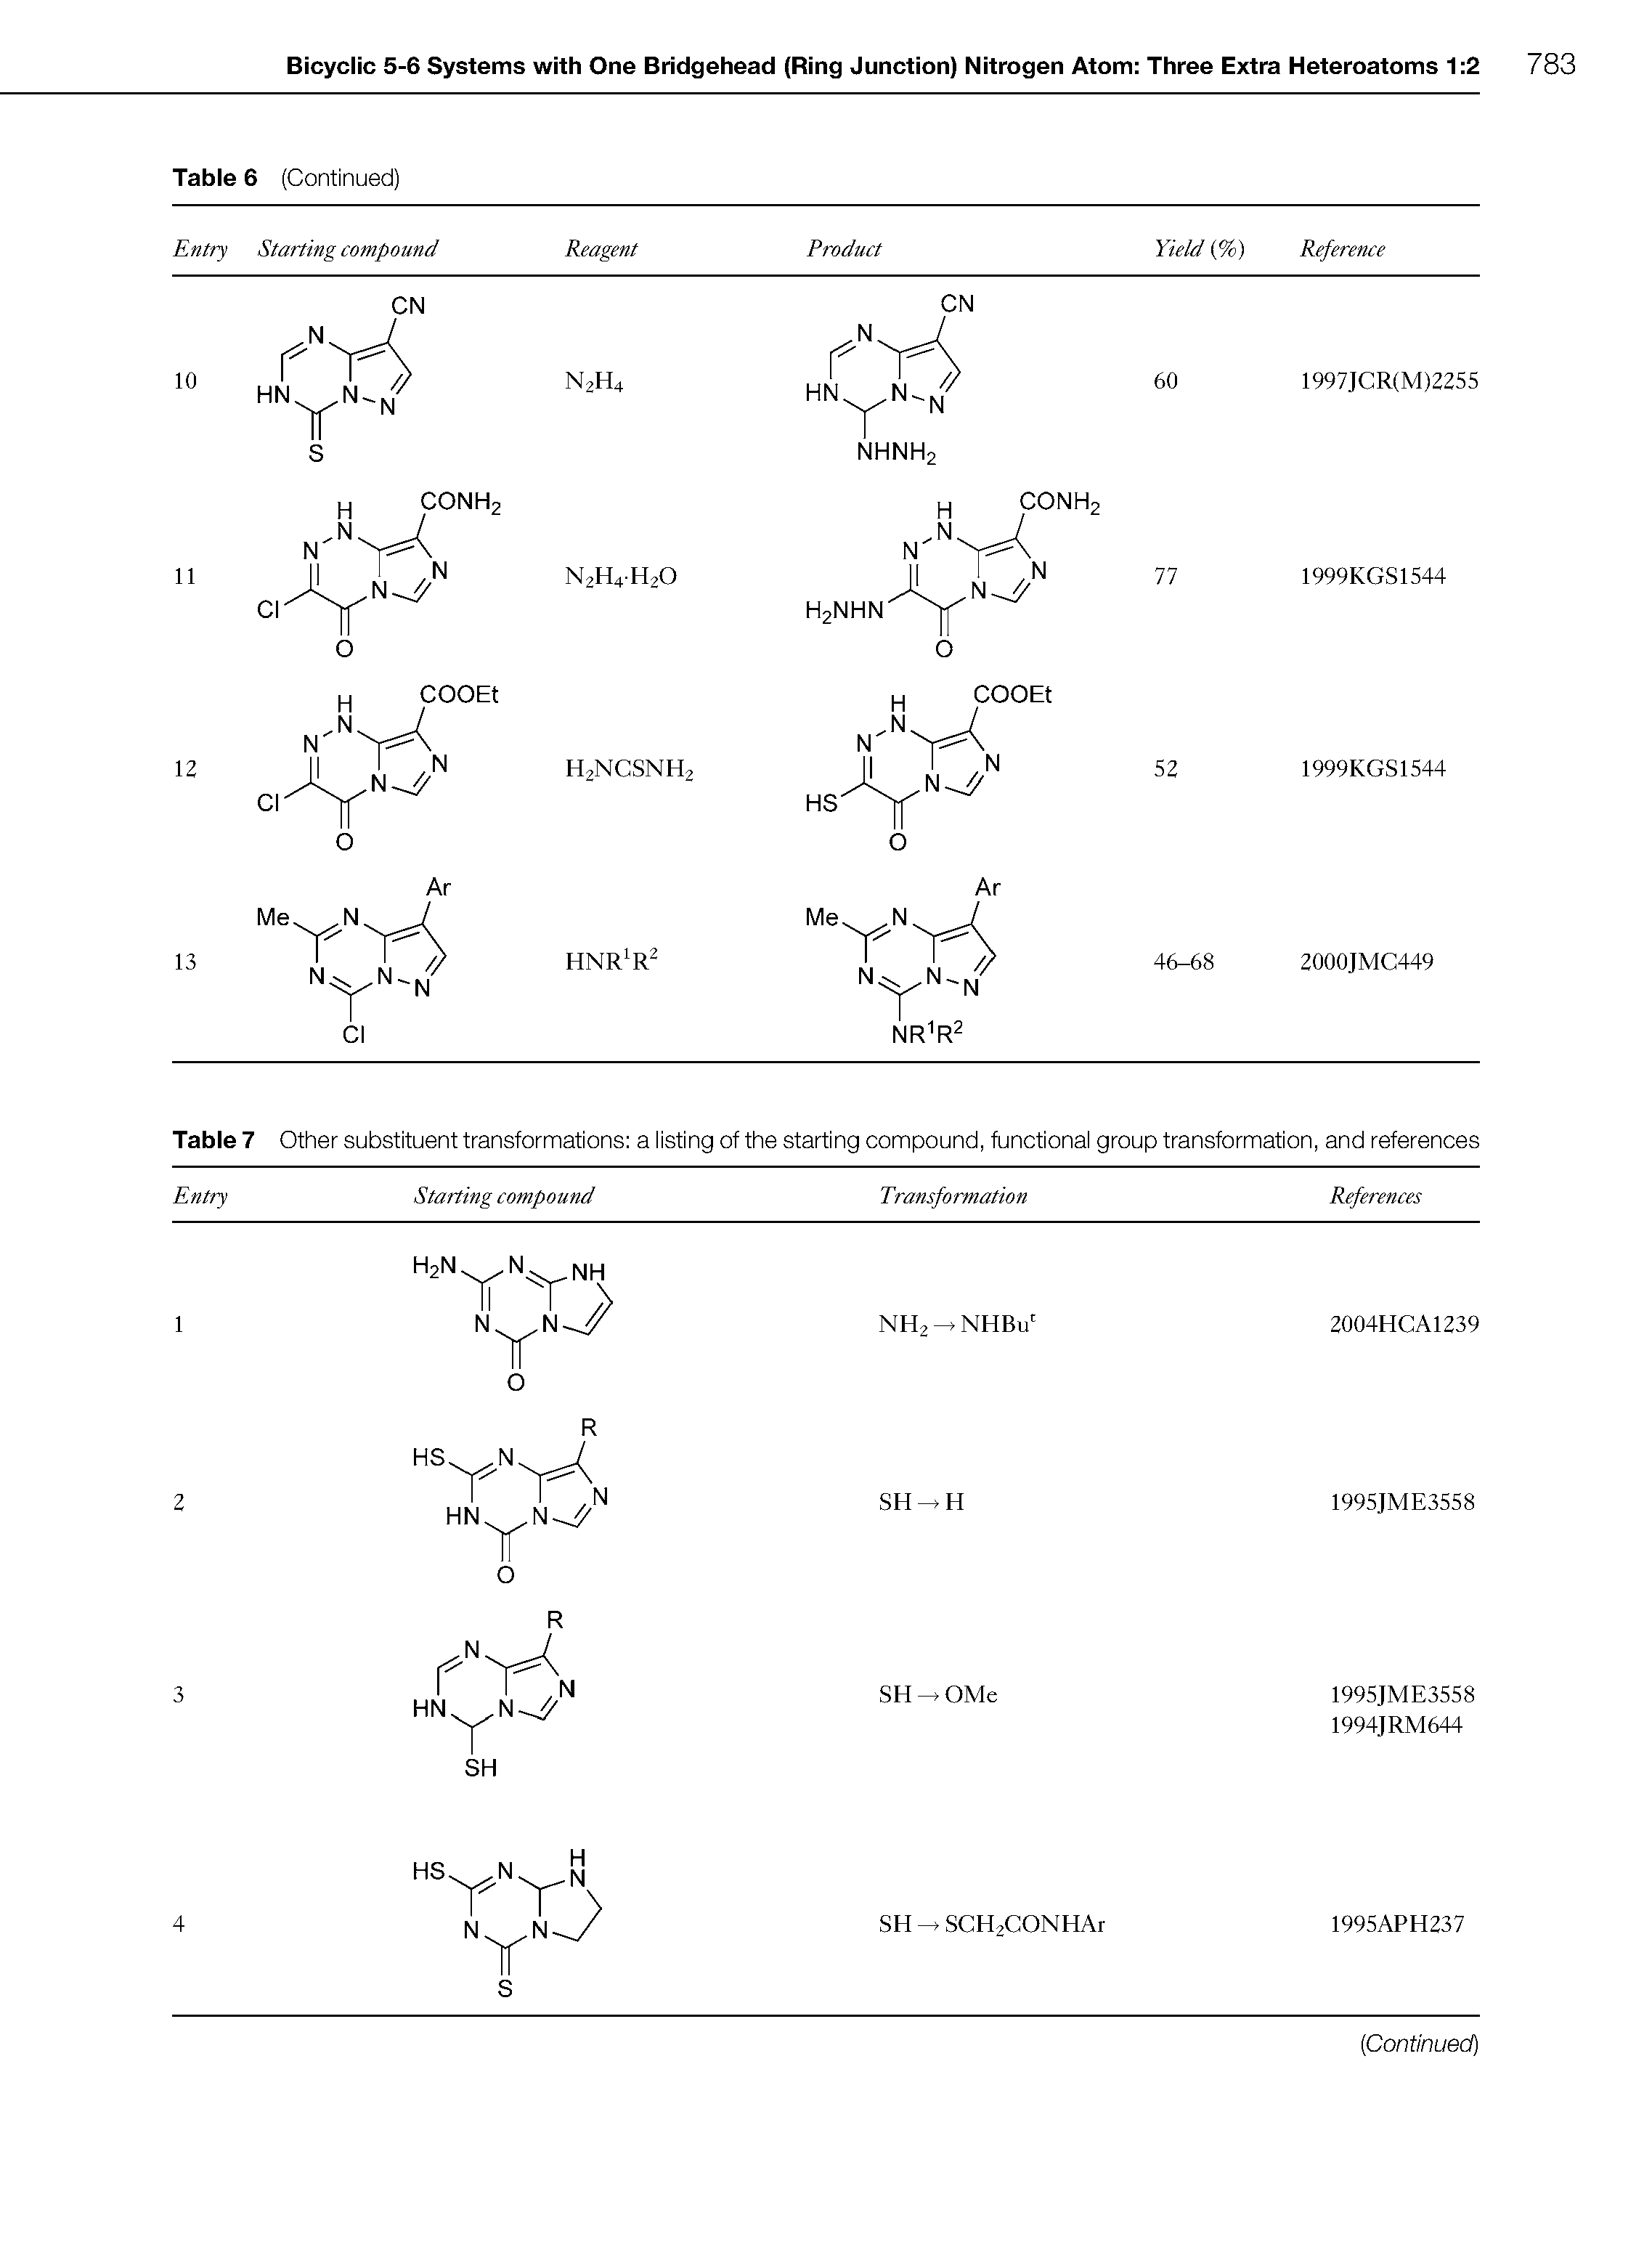 Table 7 Other substituent transformations a listing of the starting compound, functional group transformation, and references...